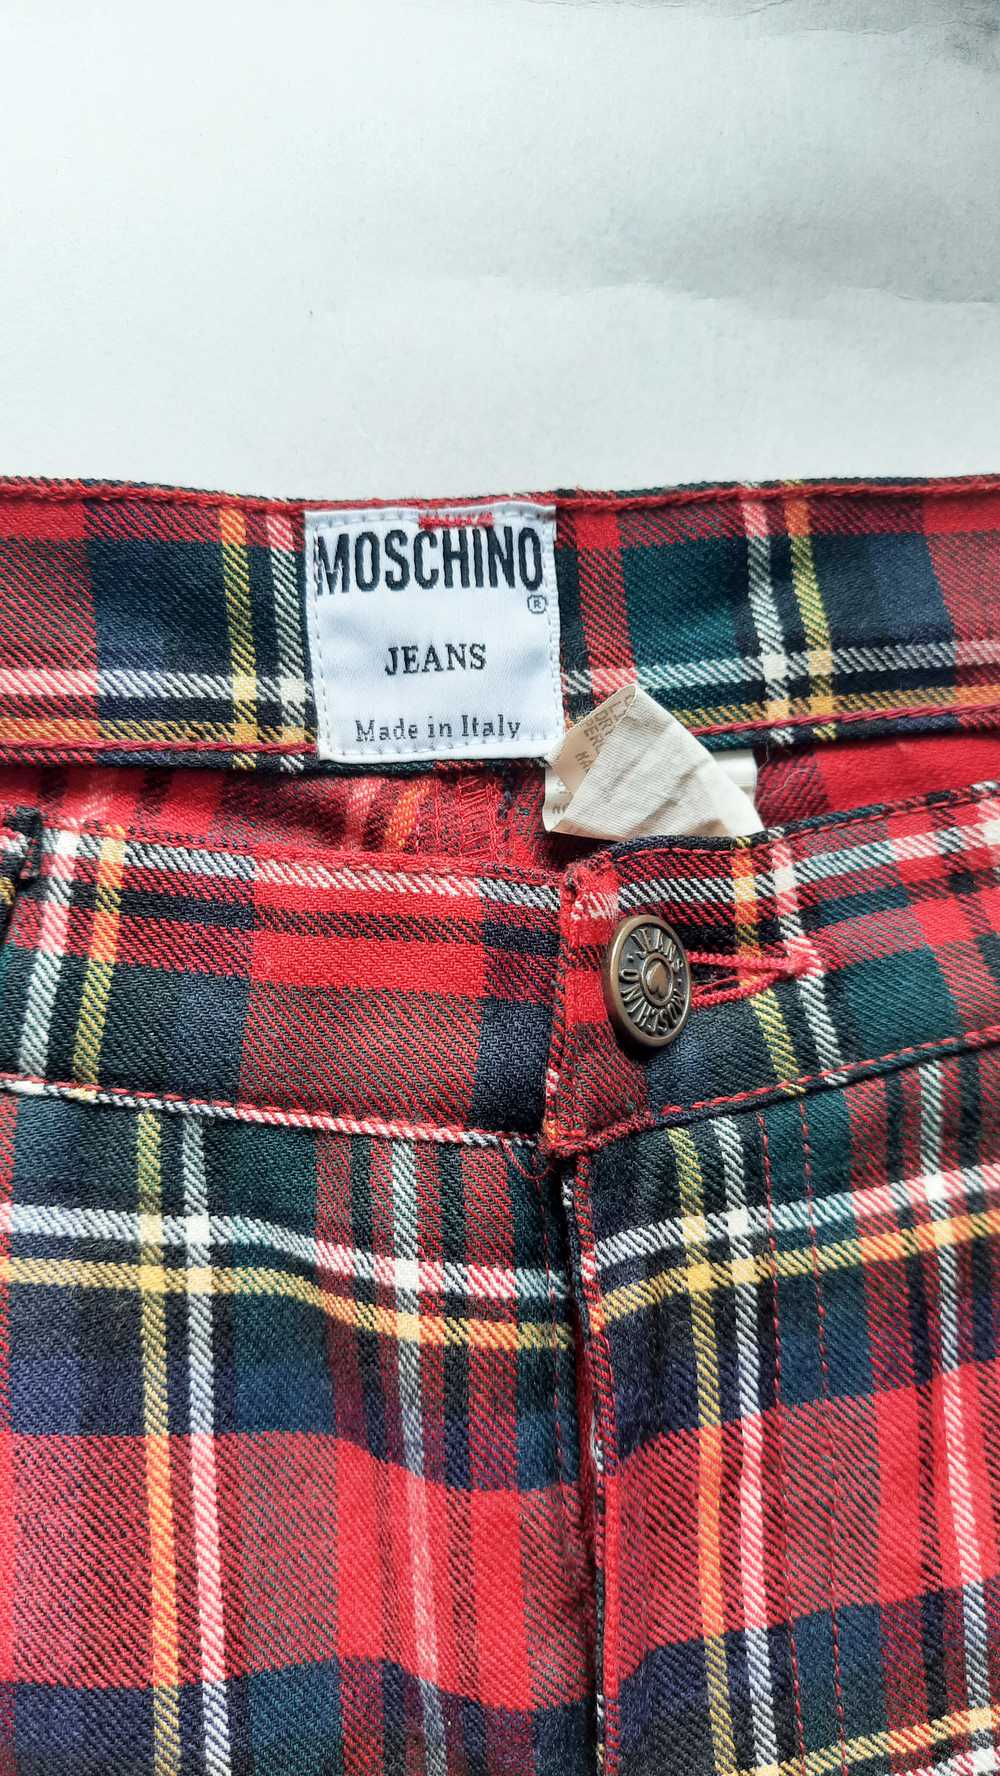 Vintage - Moschino Jeans Tartan Trousers - image 2